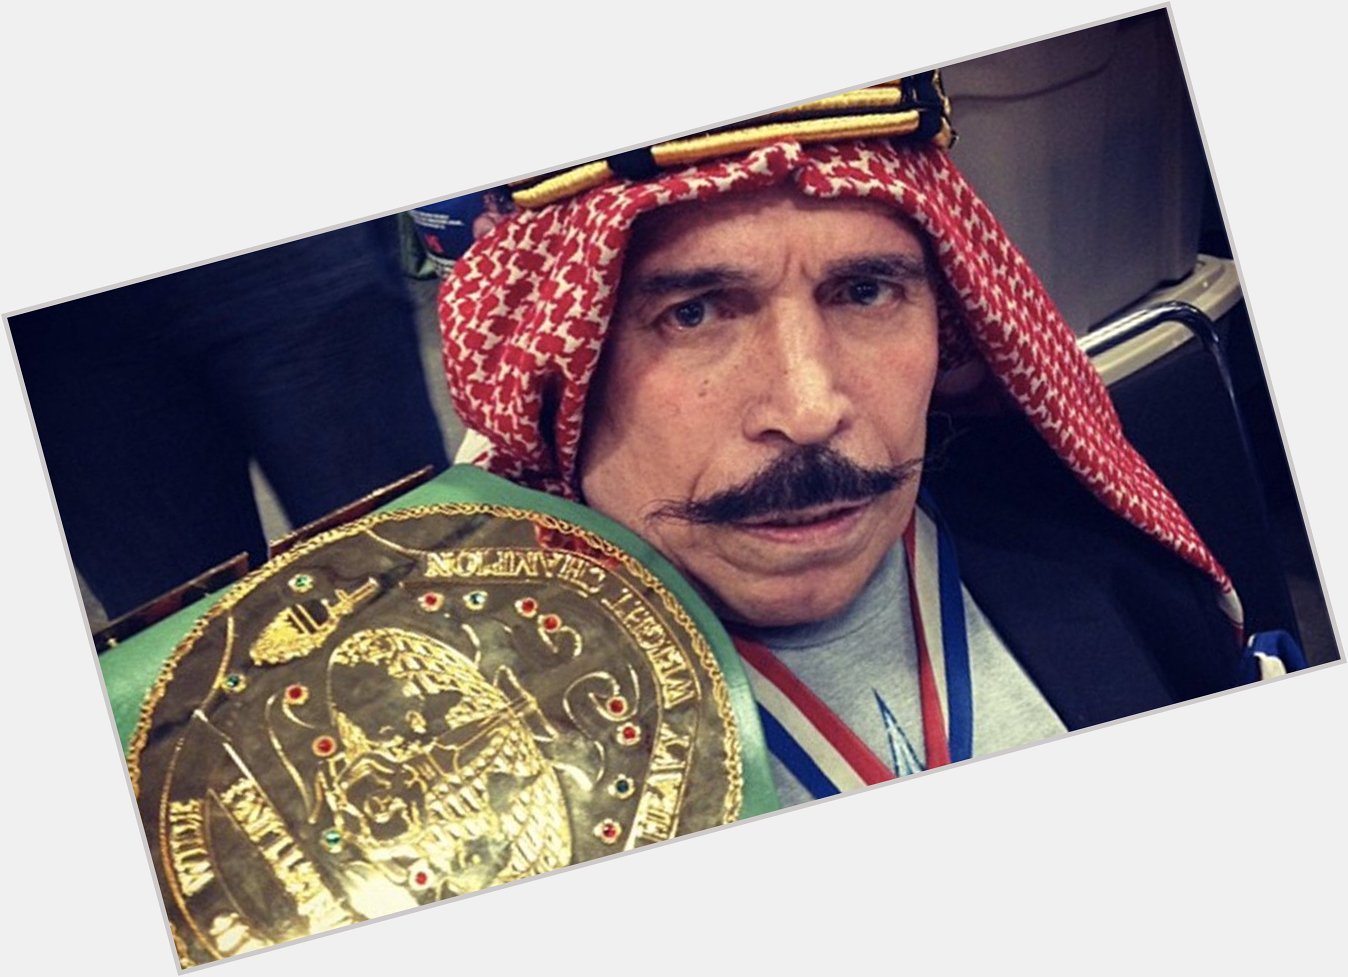 Happy Birthday to former WWE Champion and Hall of Famer The Iron Sheik who turns 75 today! 